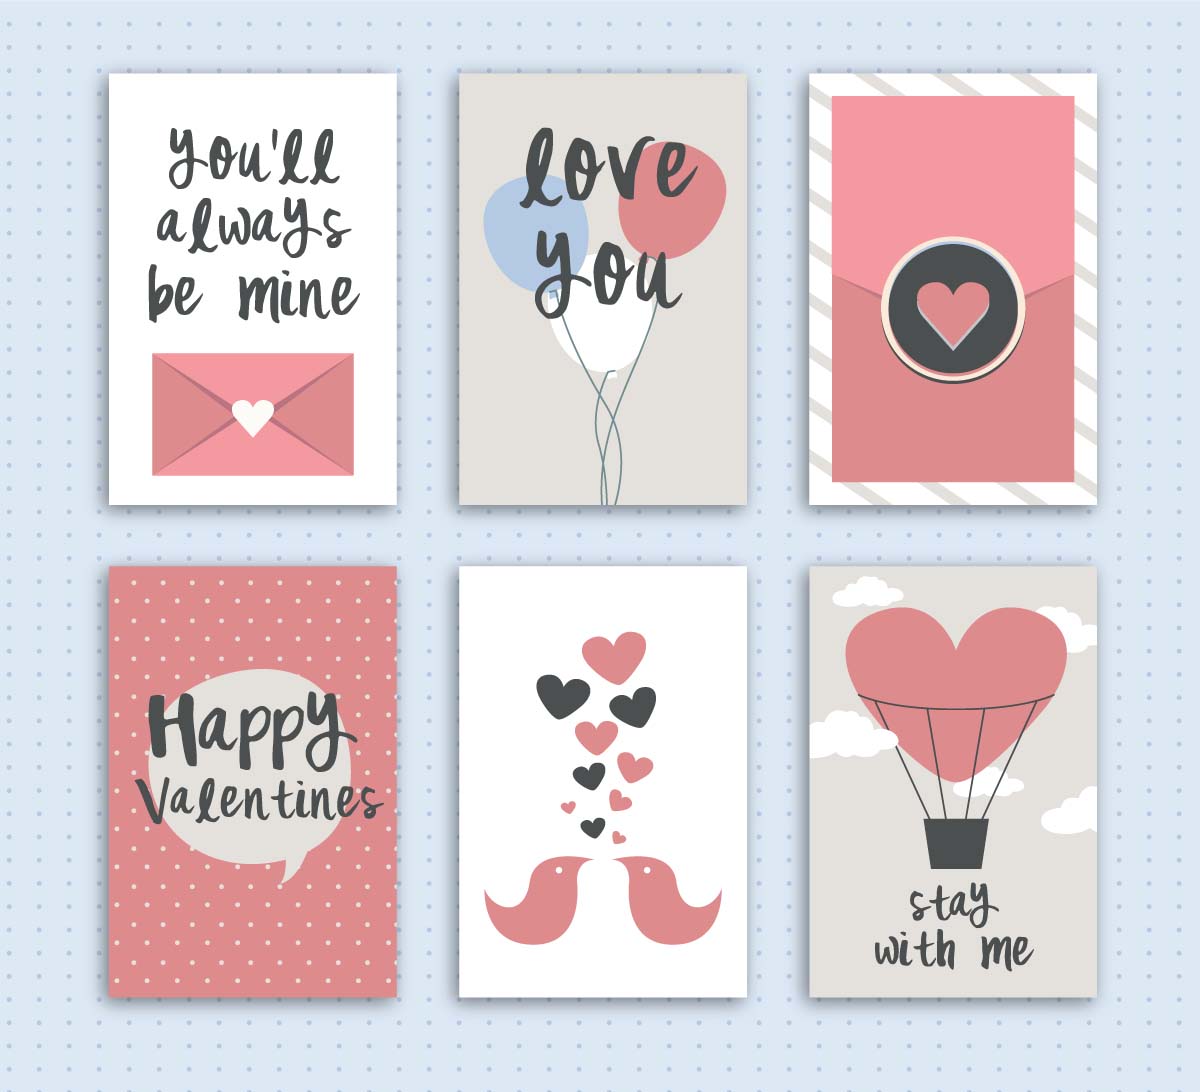 Collection of adorable valentines day cards | Free download